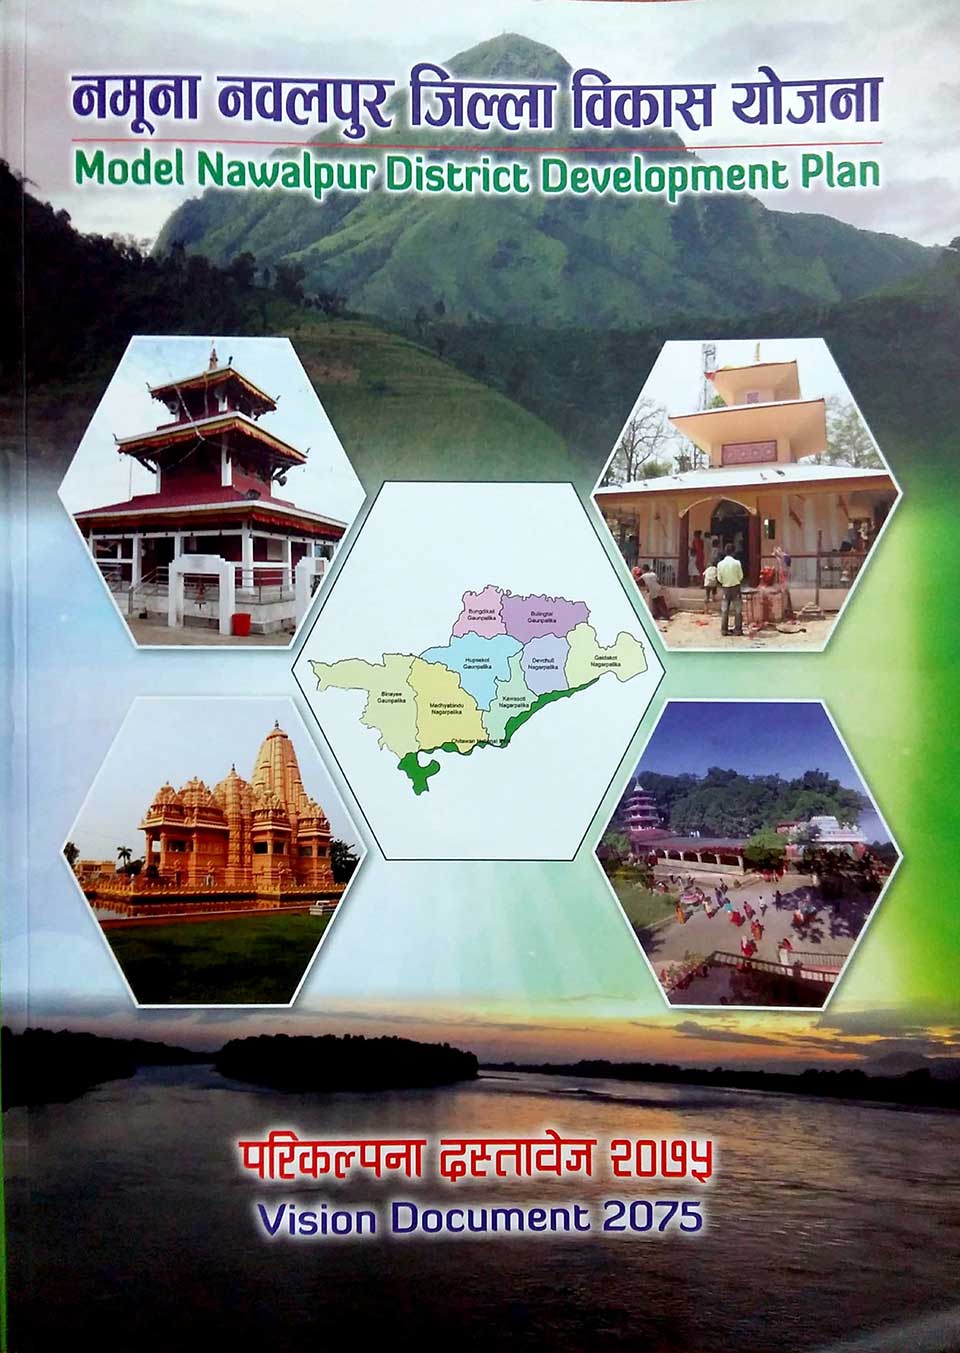 Plan envisions developing Nawalpur as model district